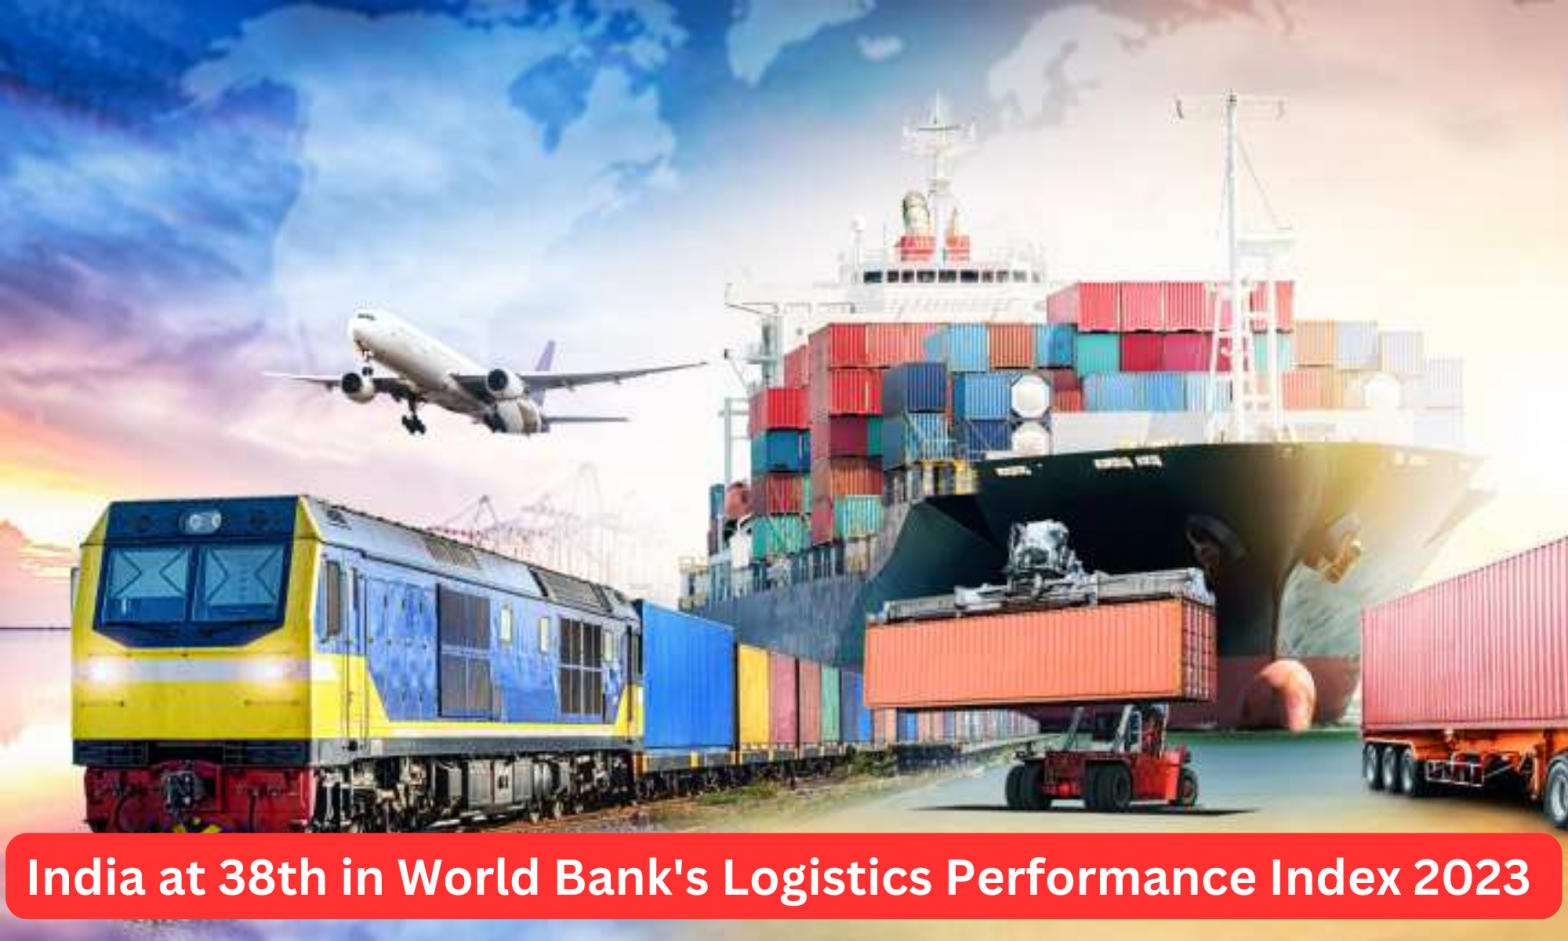 India Climbs 6 Spots to 38th in World Bank's Logistics Performance Index 2023